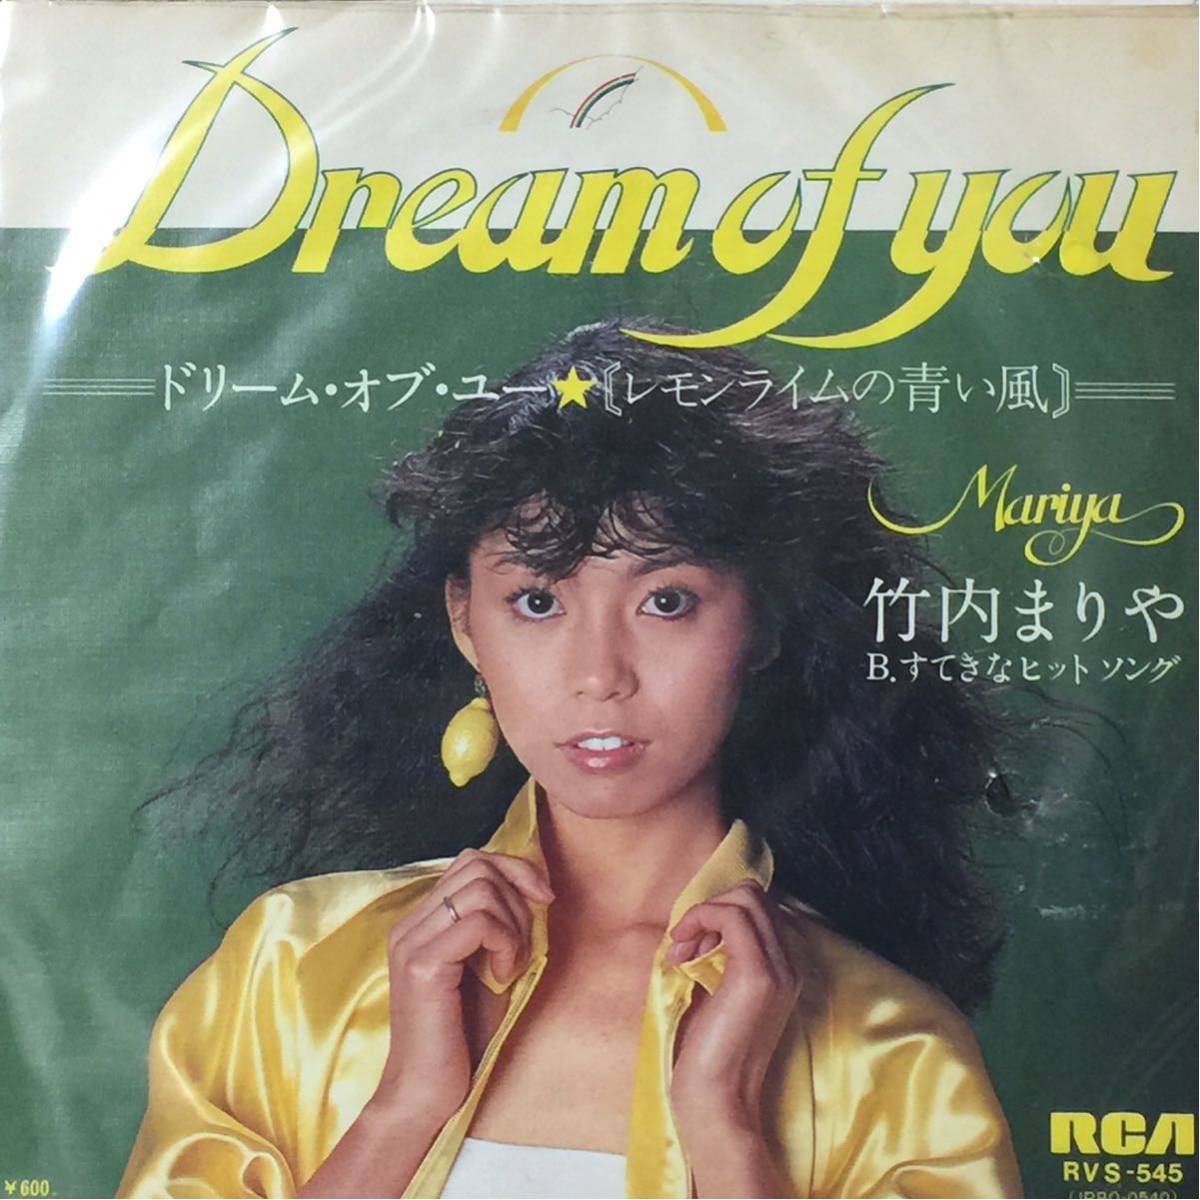  sample record * white lable Takeuchi Mariya [Dream Of You /.... hit song] 7inch EP